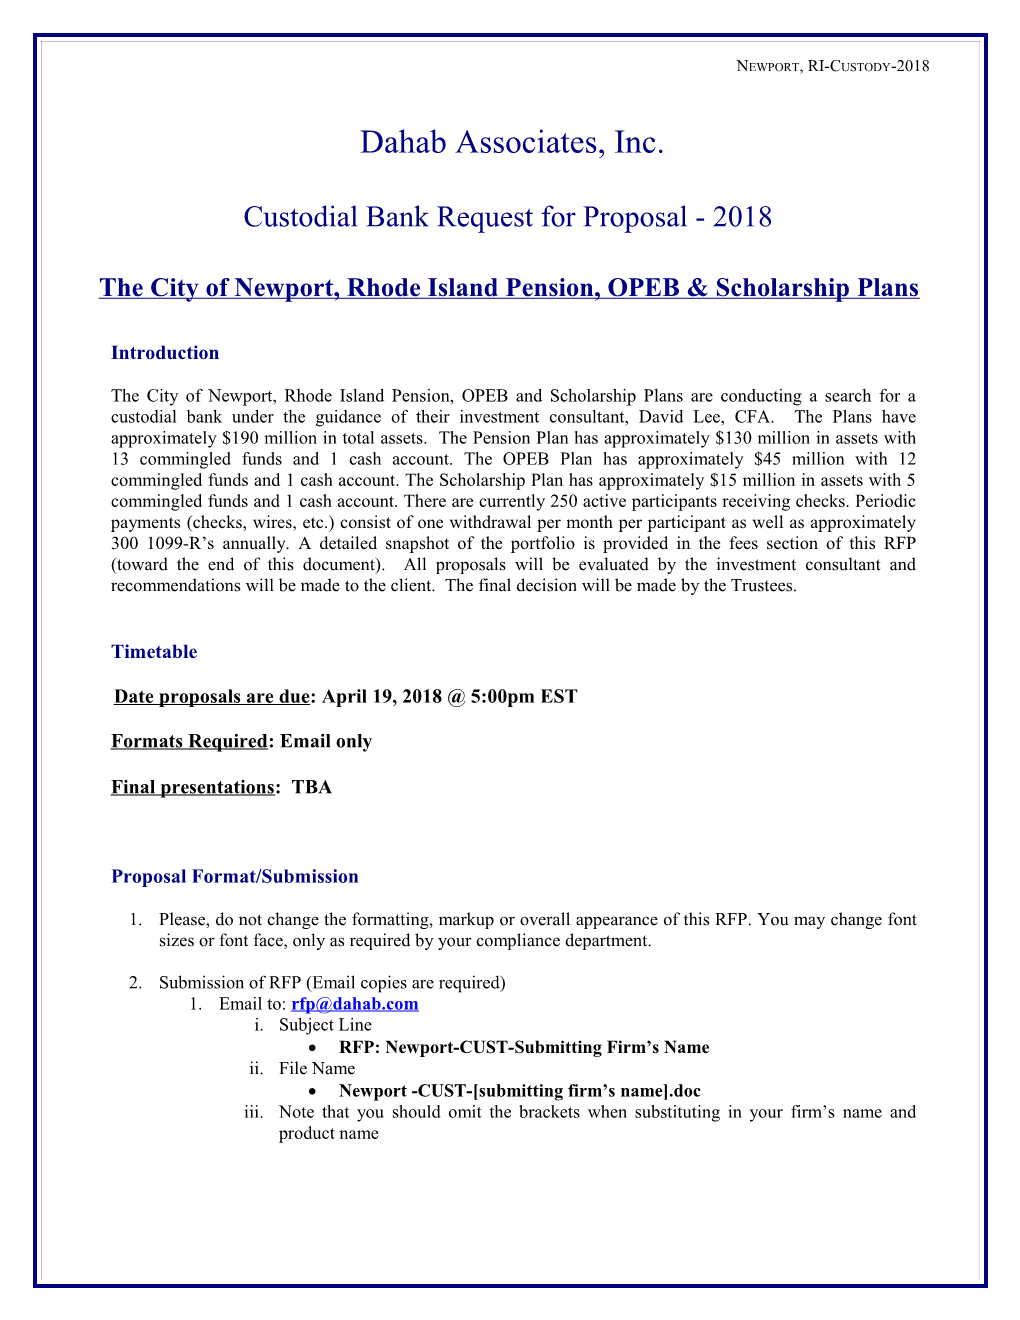 Custodial Bank Request for Proposal - 2018